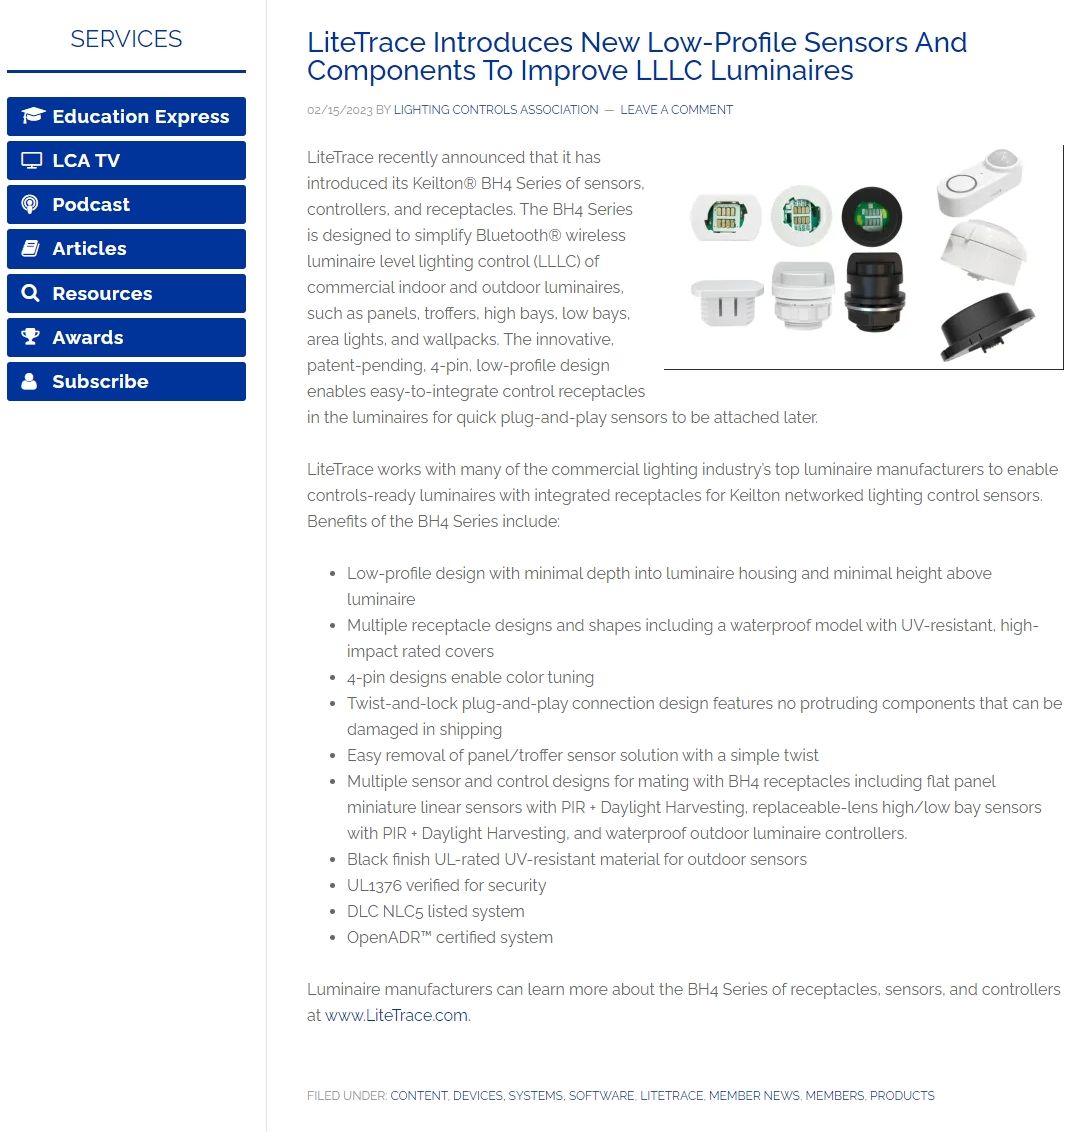 LiteTrace Introduces New Low-Profile Sensors And Components To Improve LLLC Luminaires